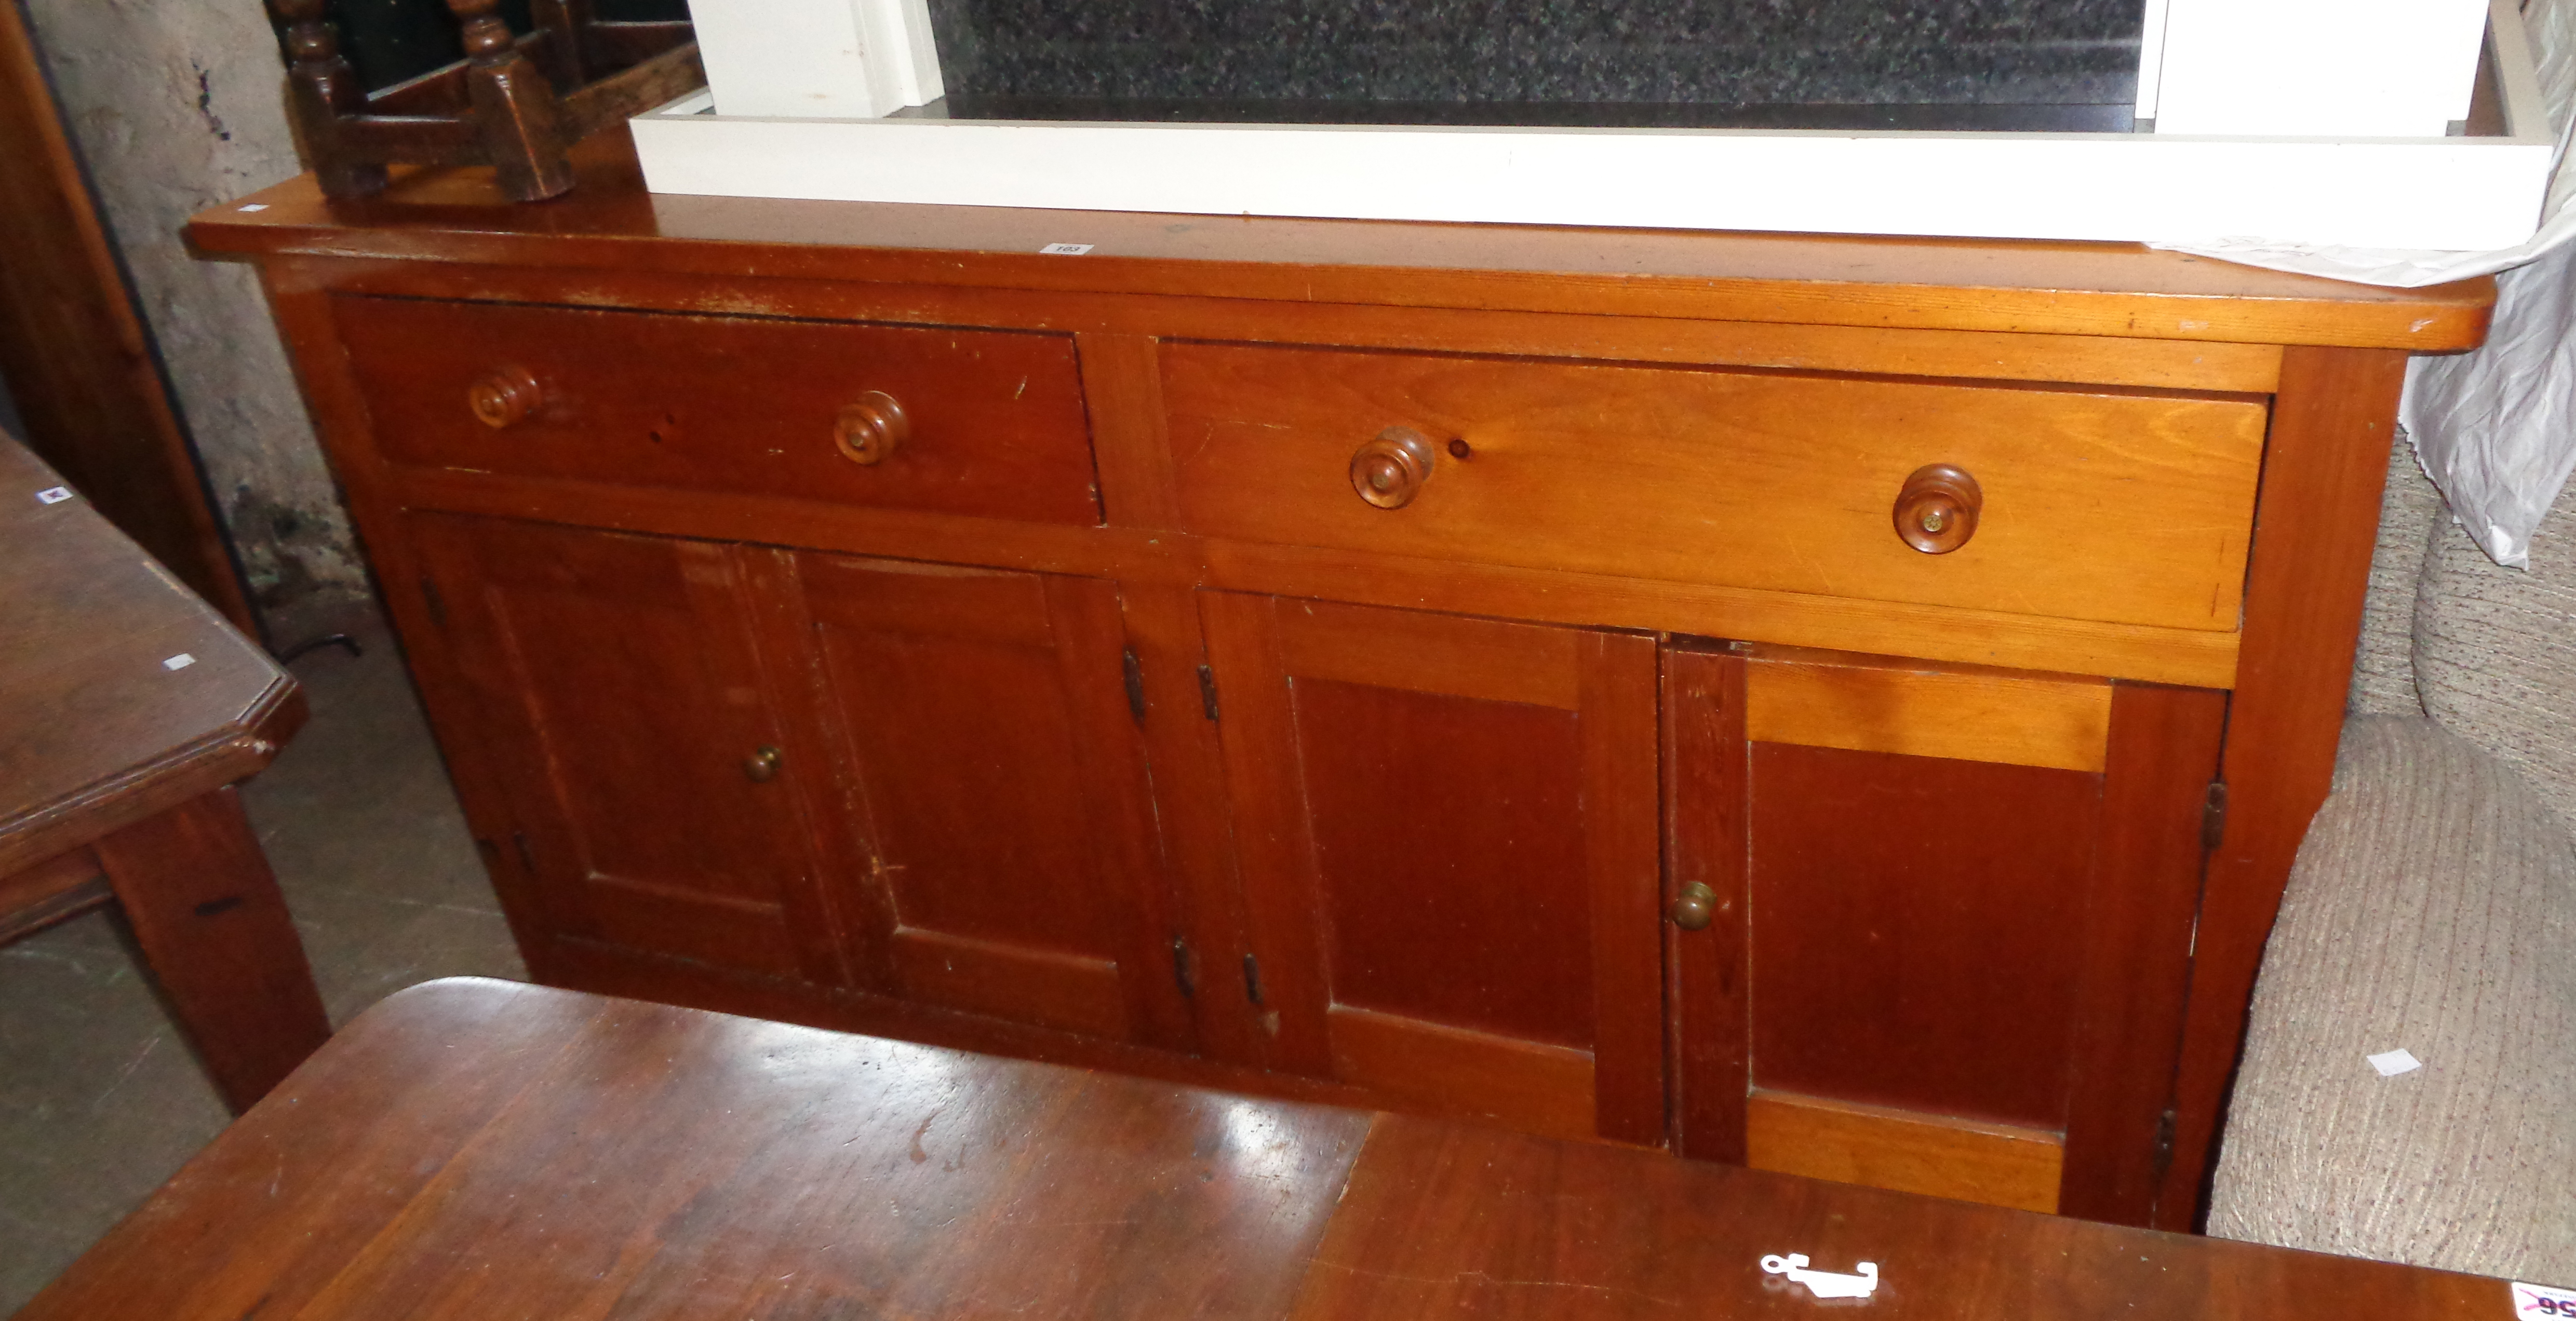 A 6' 3" Victorian polished pine dresser base with two frieze drawers and two pairs of panelled